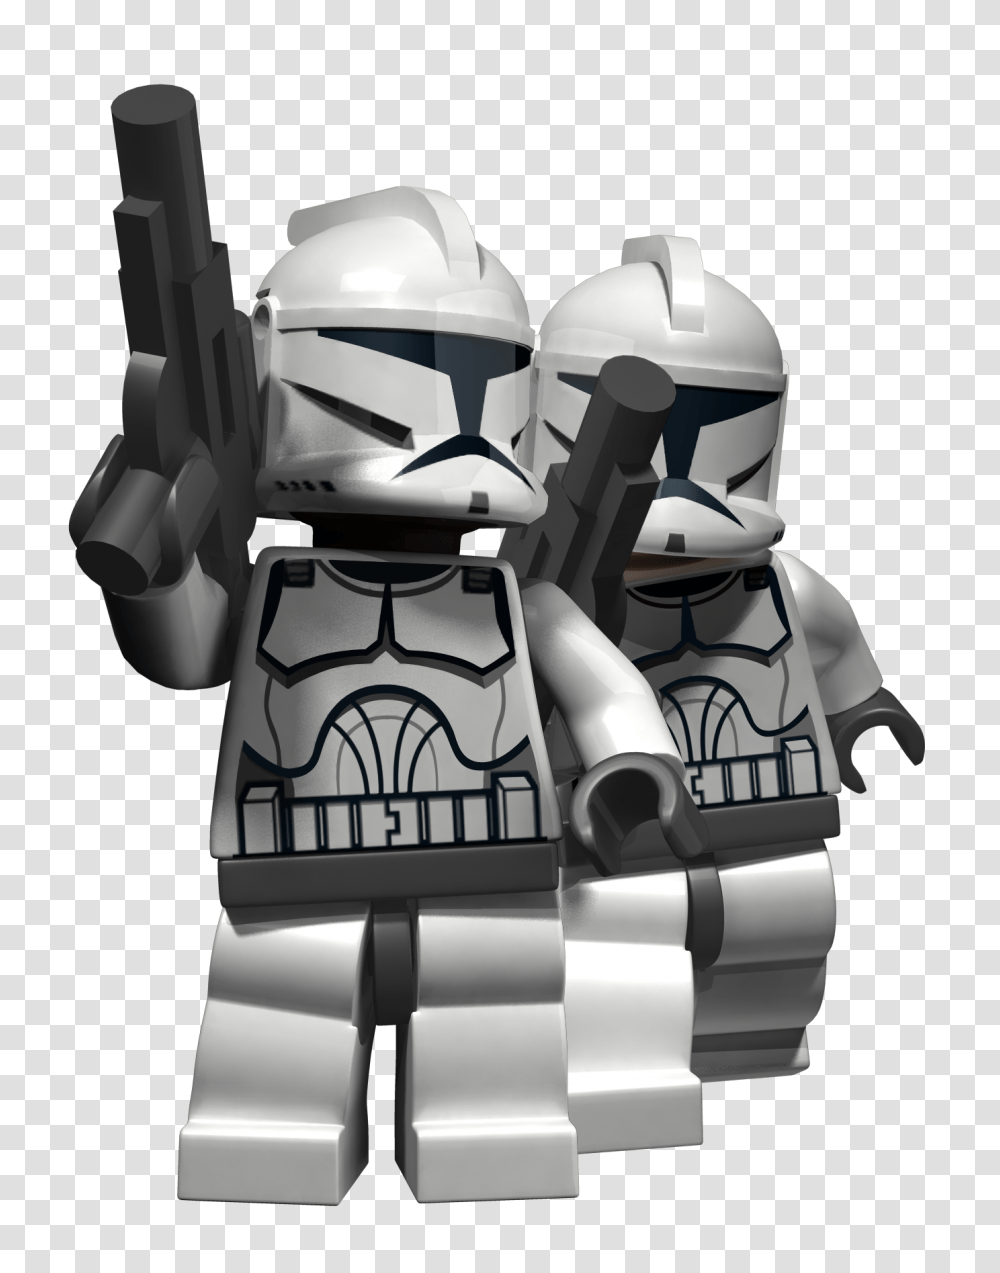 Star Wars Image Purepng Free Cc0 Lego Star Wars Clone Troopers, Toy, Helmet, Clothing, Apparel Transparent Png